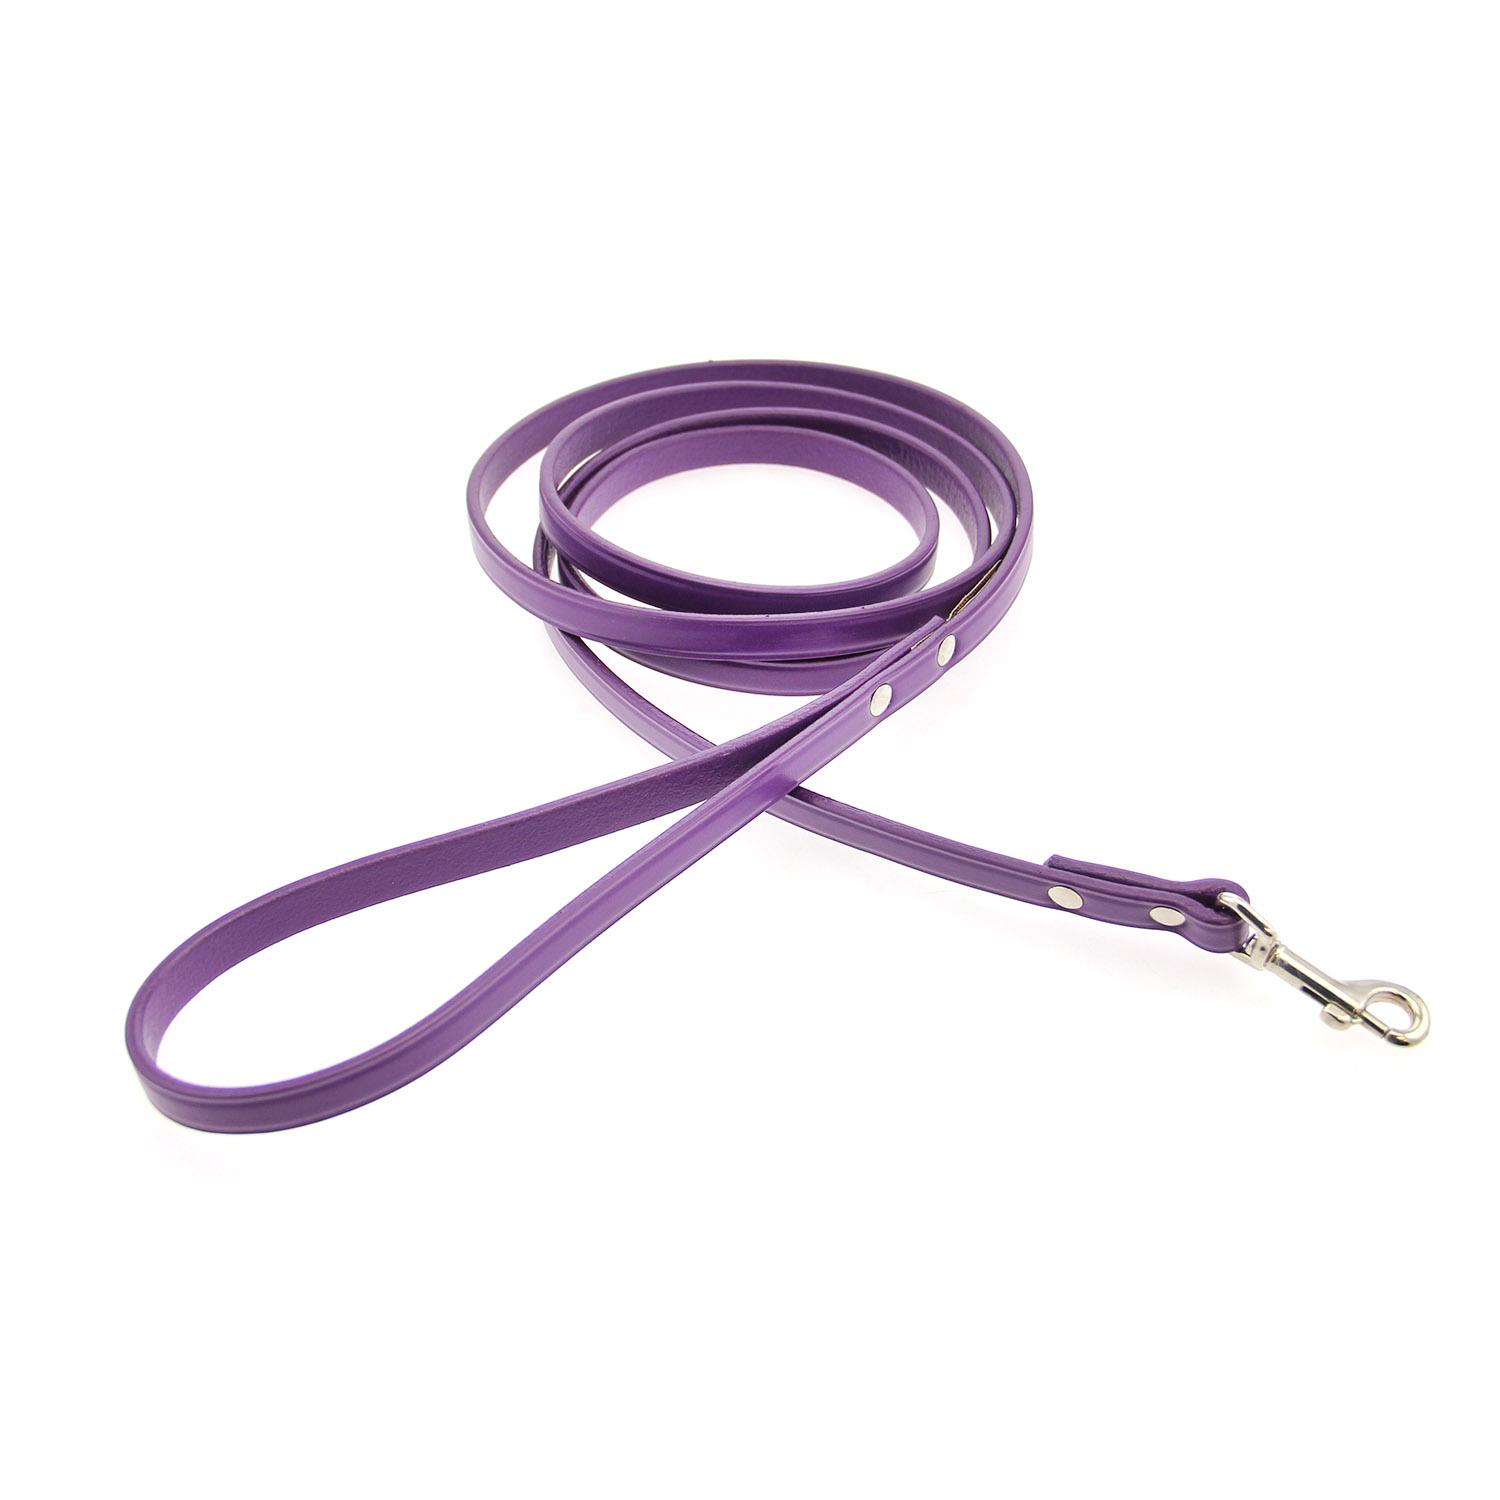 Town Leather Dog Leash by Auburn Leather - Purple